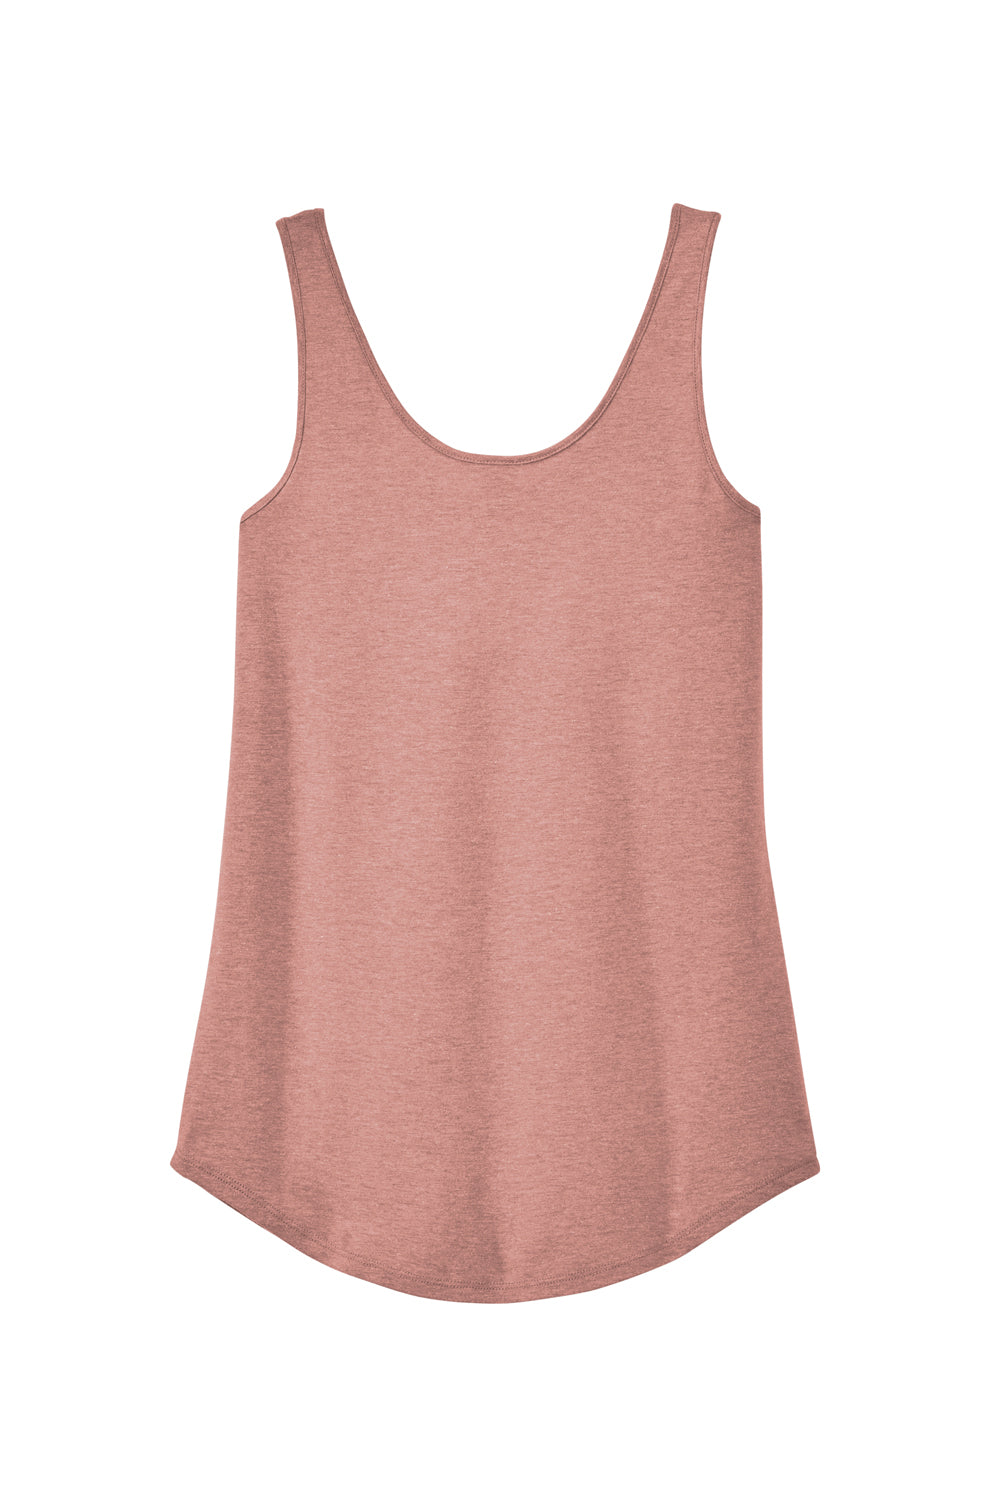 District DT151 Womens Perfect Tri Relaxed Tank Top Blush Frost Flat Back